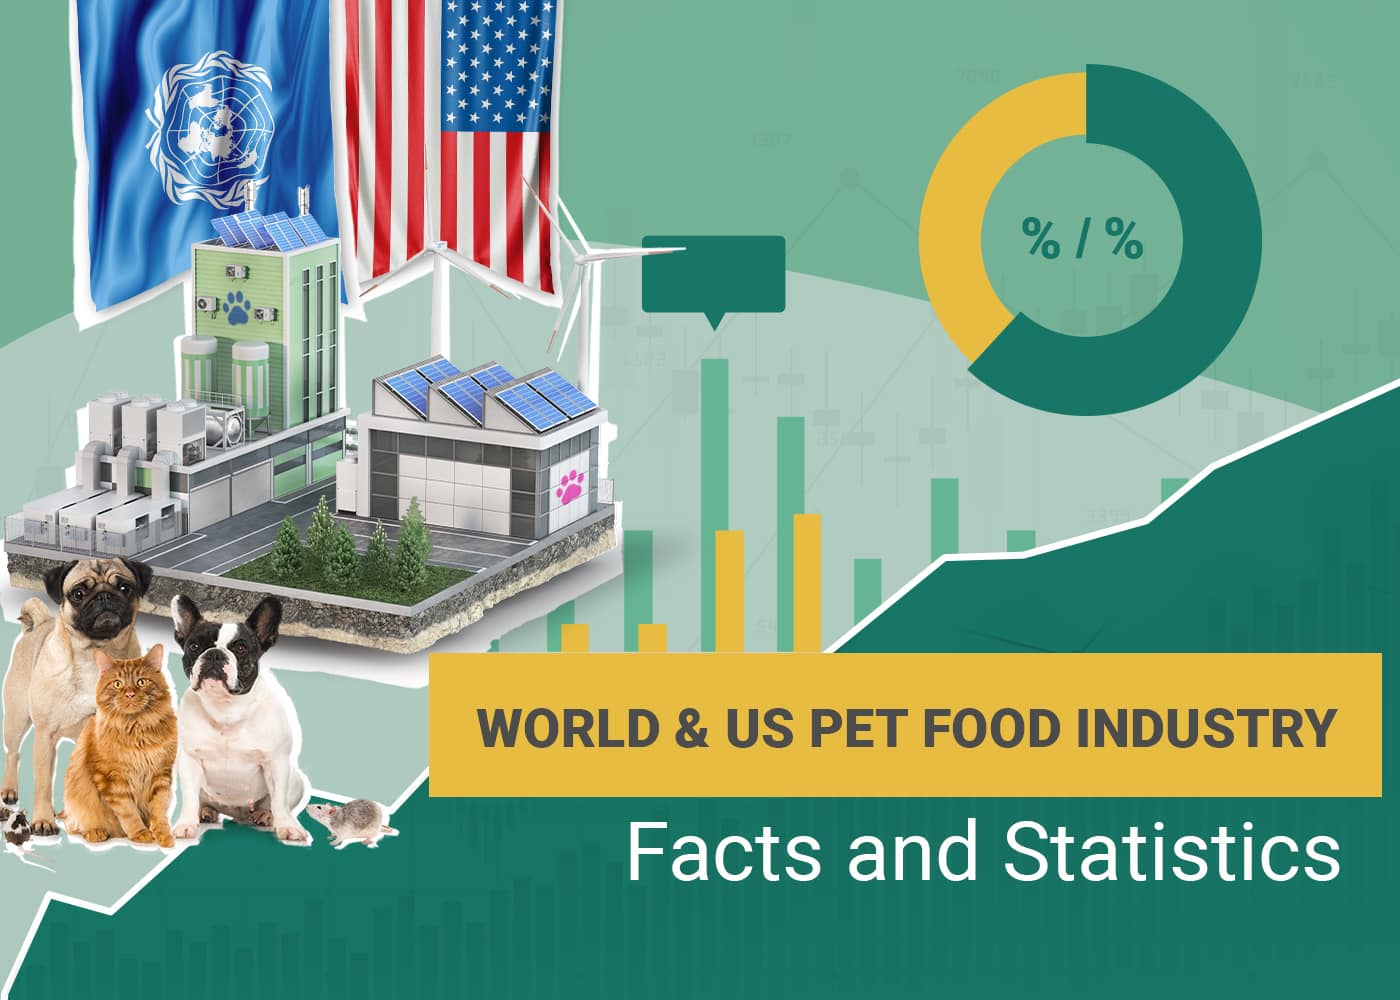 World & US Pet Food Industry Facts and Statistics